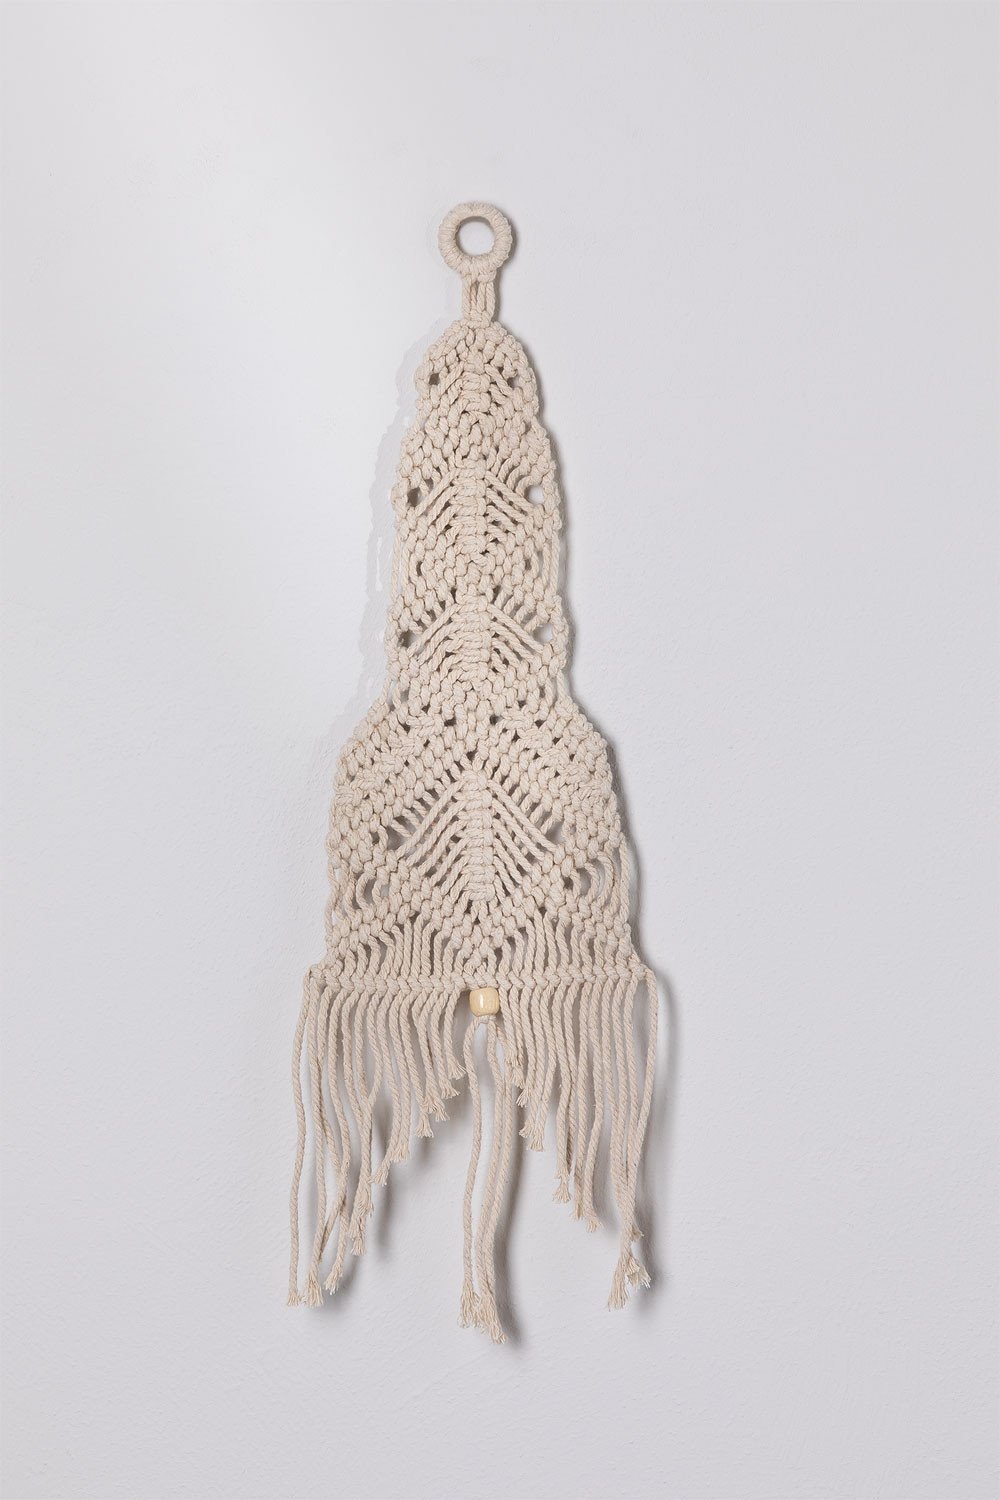 Macrame Tapestry Nath, gallery image 2